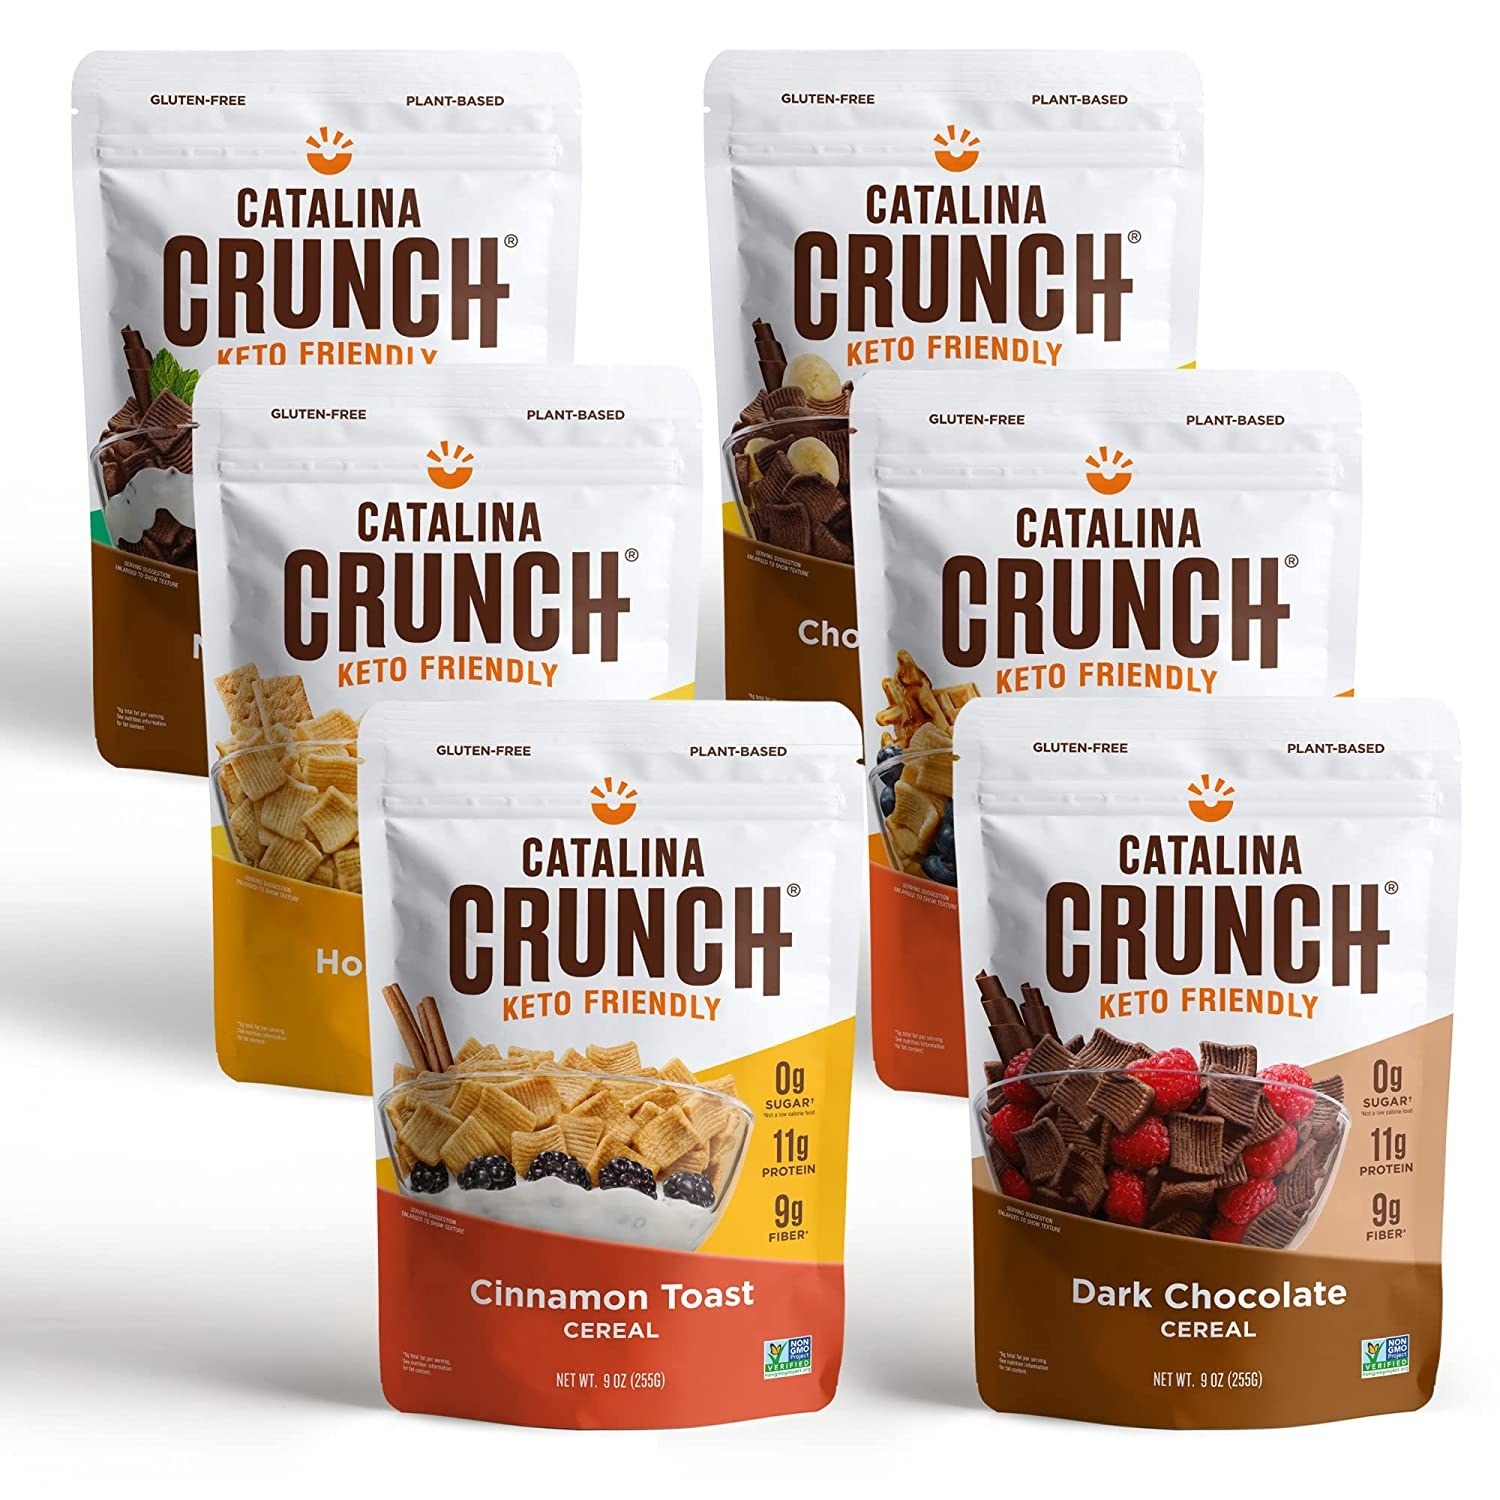 six 10 inch tall bags that say catalina crunch and have different cereals on them: one has mini cinnamon toasts, one has dark chocolate chunks, and the other bags have flavors hidden